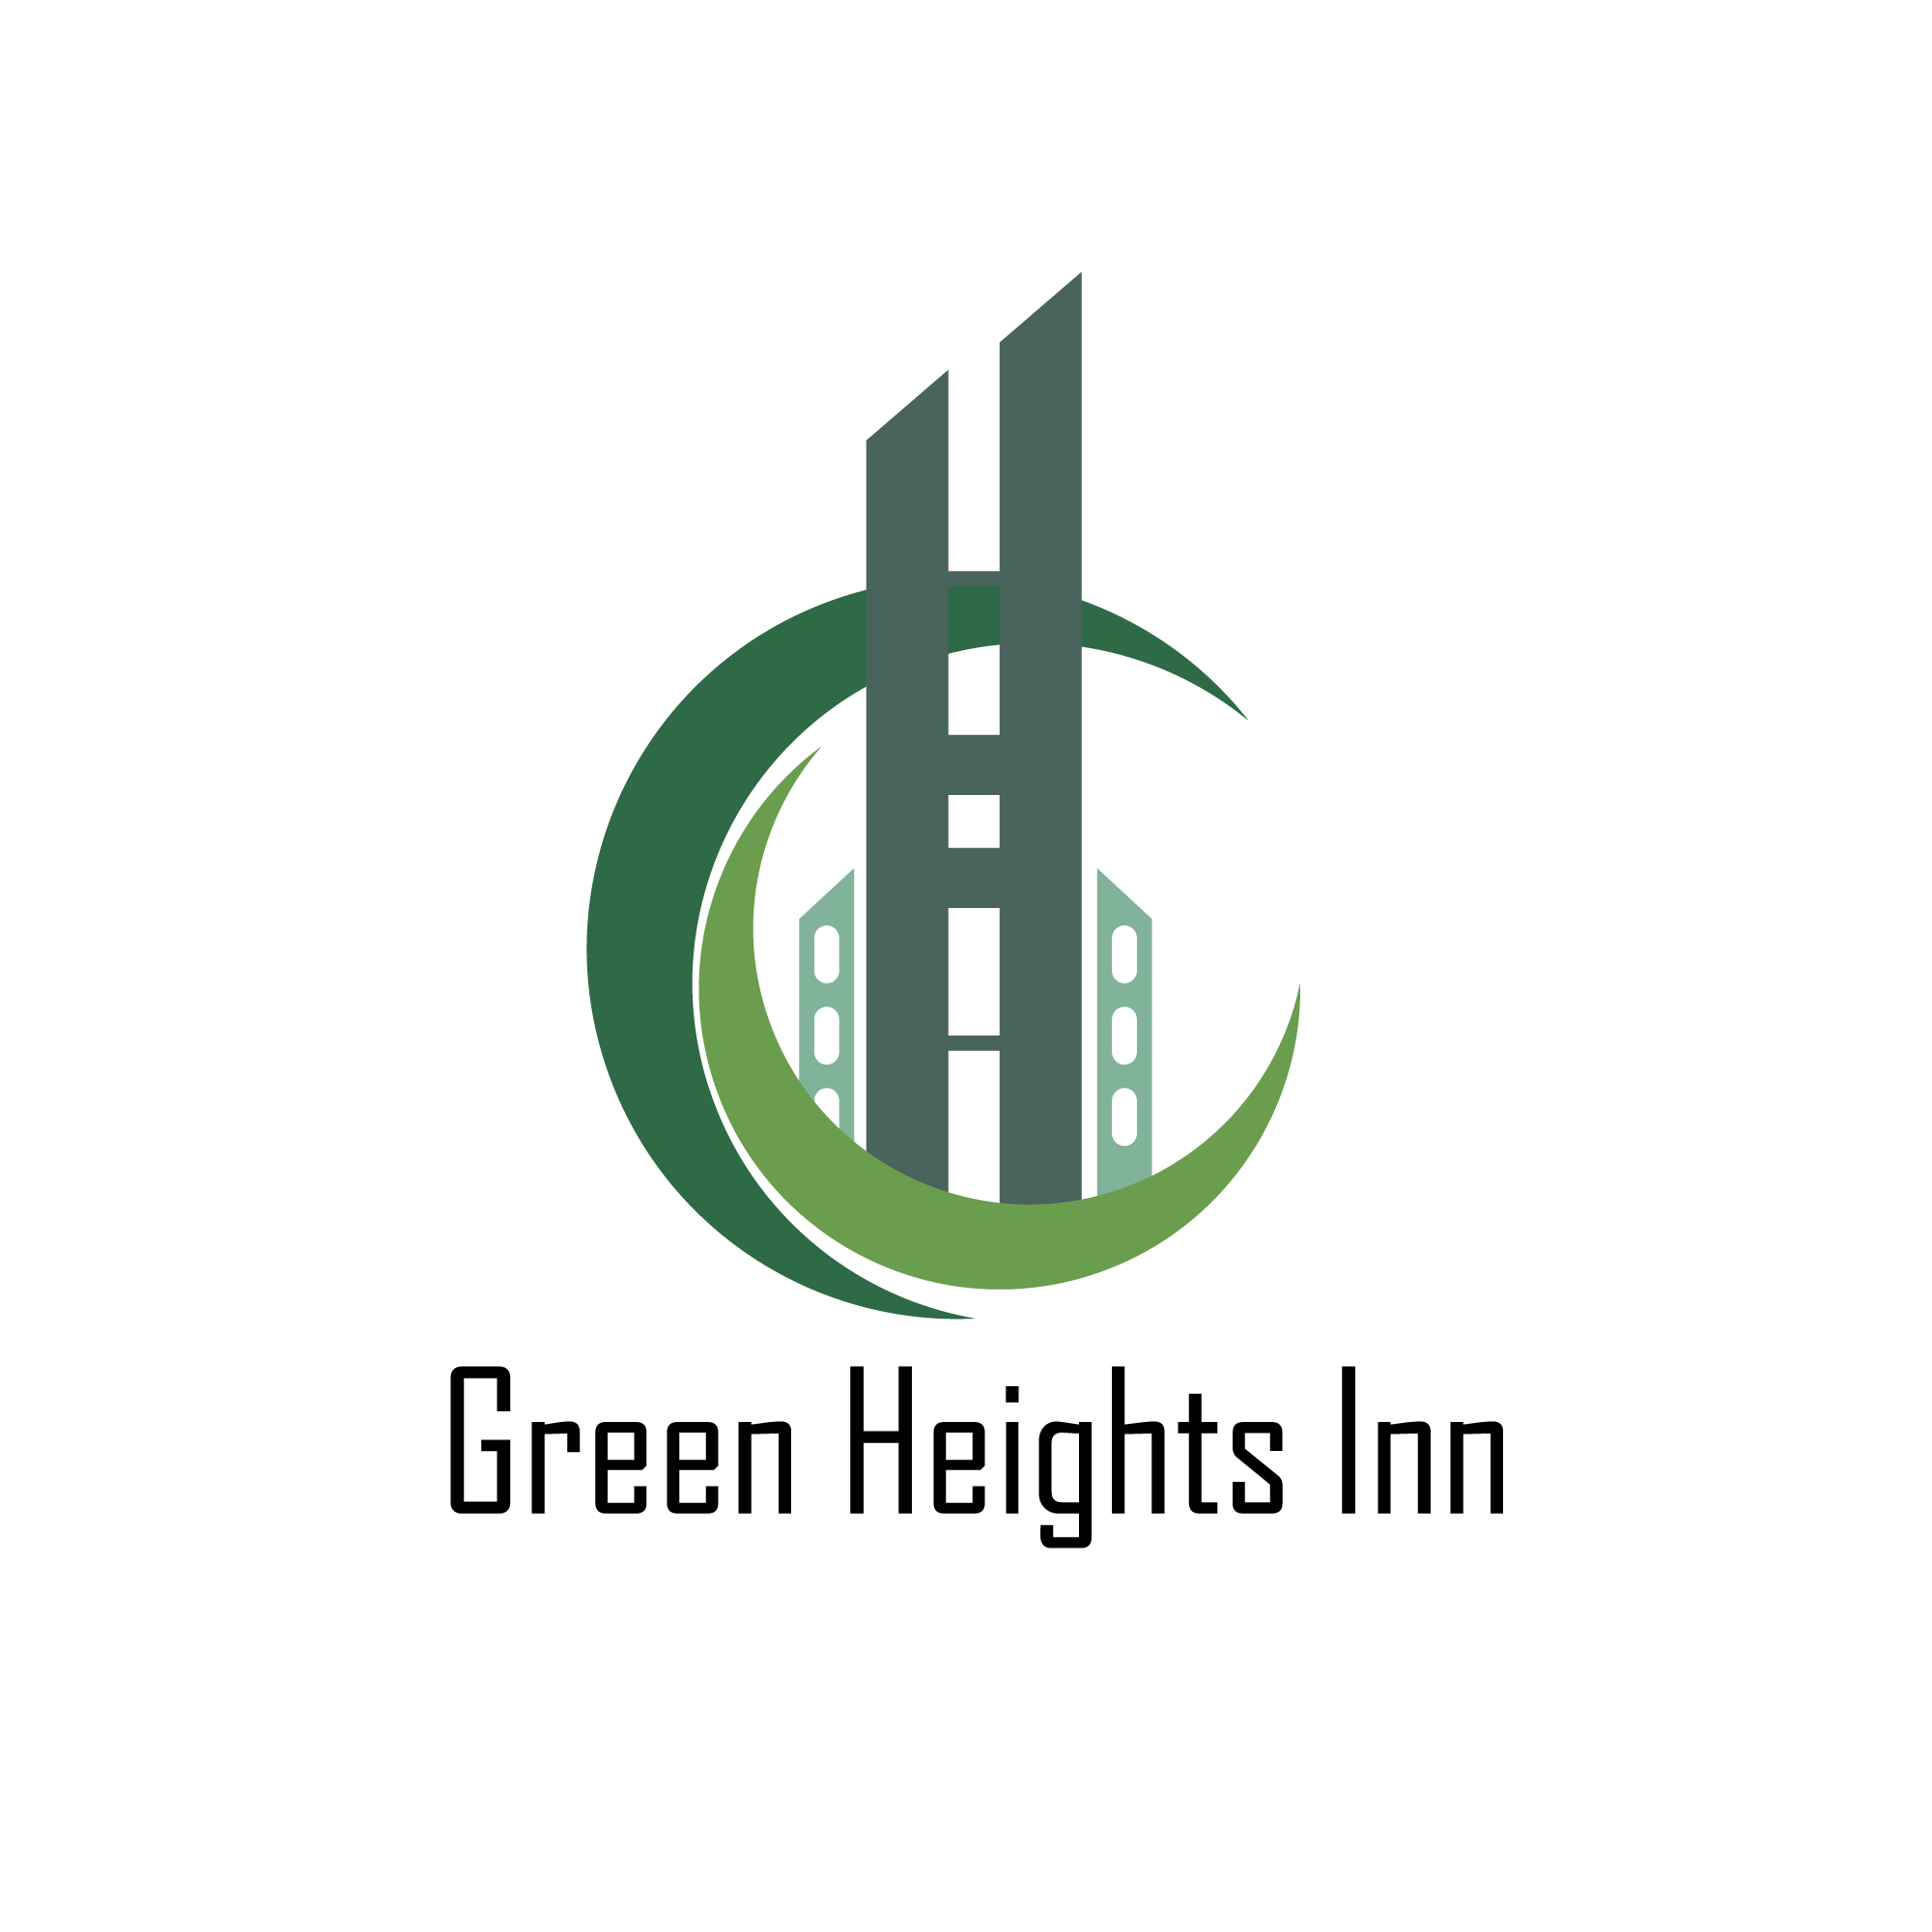 Green Heights Inn and Business Card 2d branding business cards design flat graphic design illustration logo minimal pictorial vector